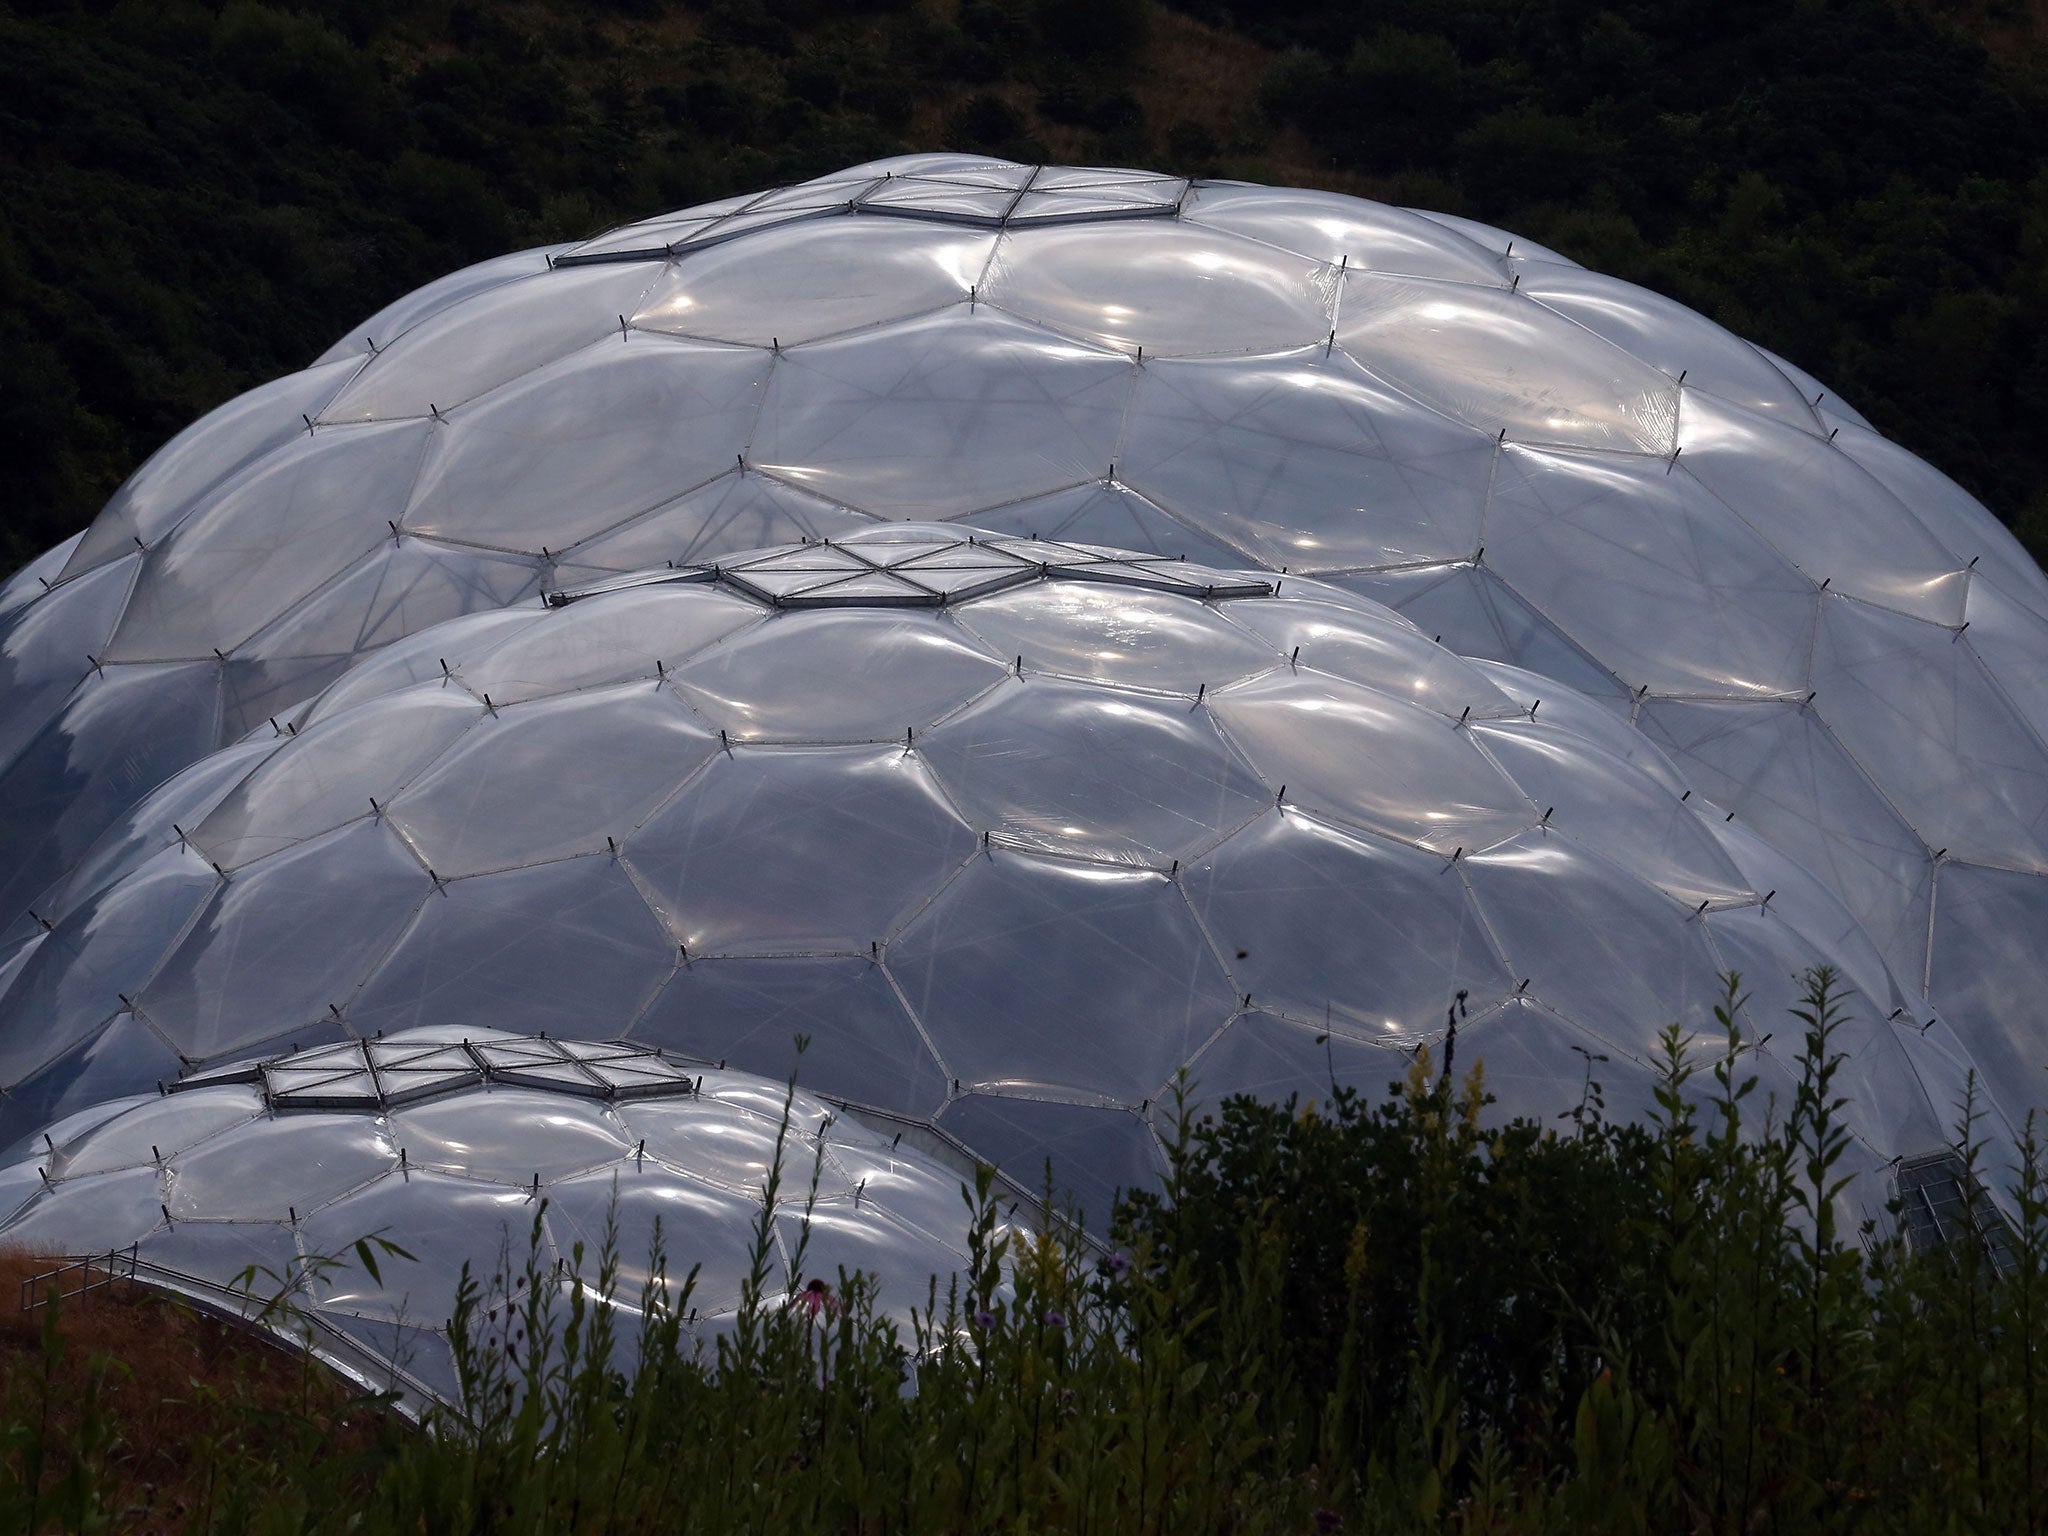 The Eden Project of exotic ecosystem-domes in Cornwall and hopes to prompt a 'tipping point' in climate action